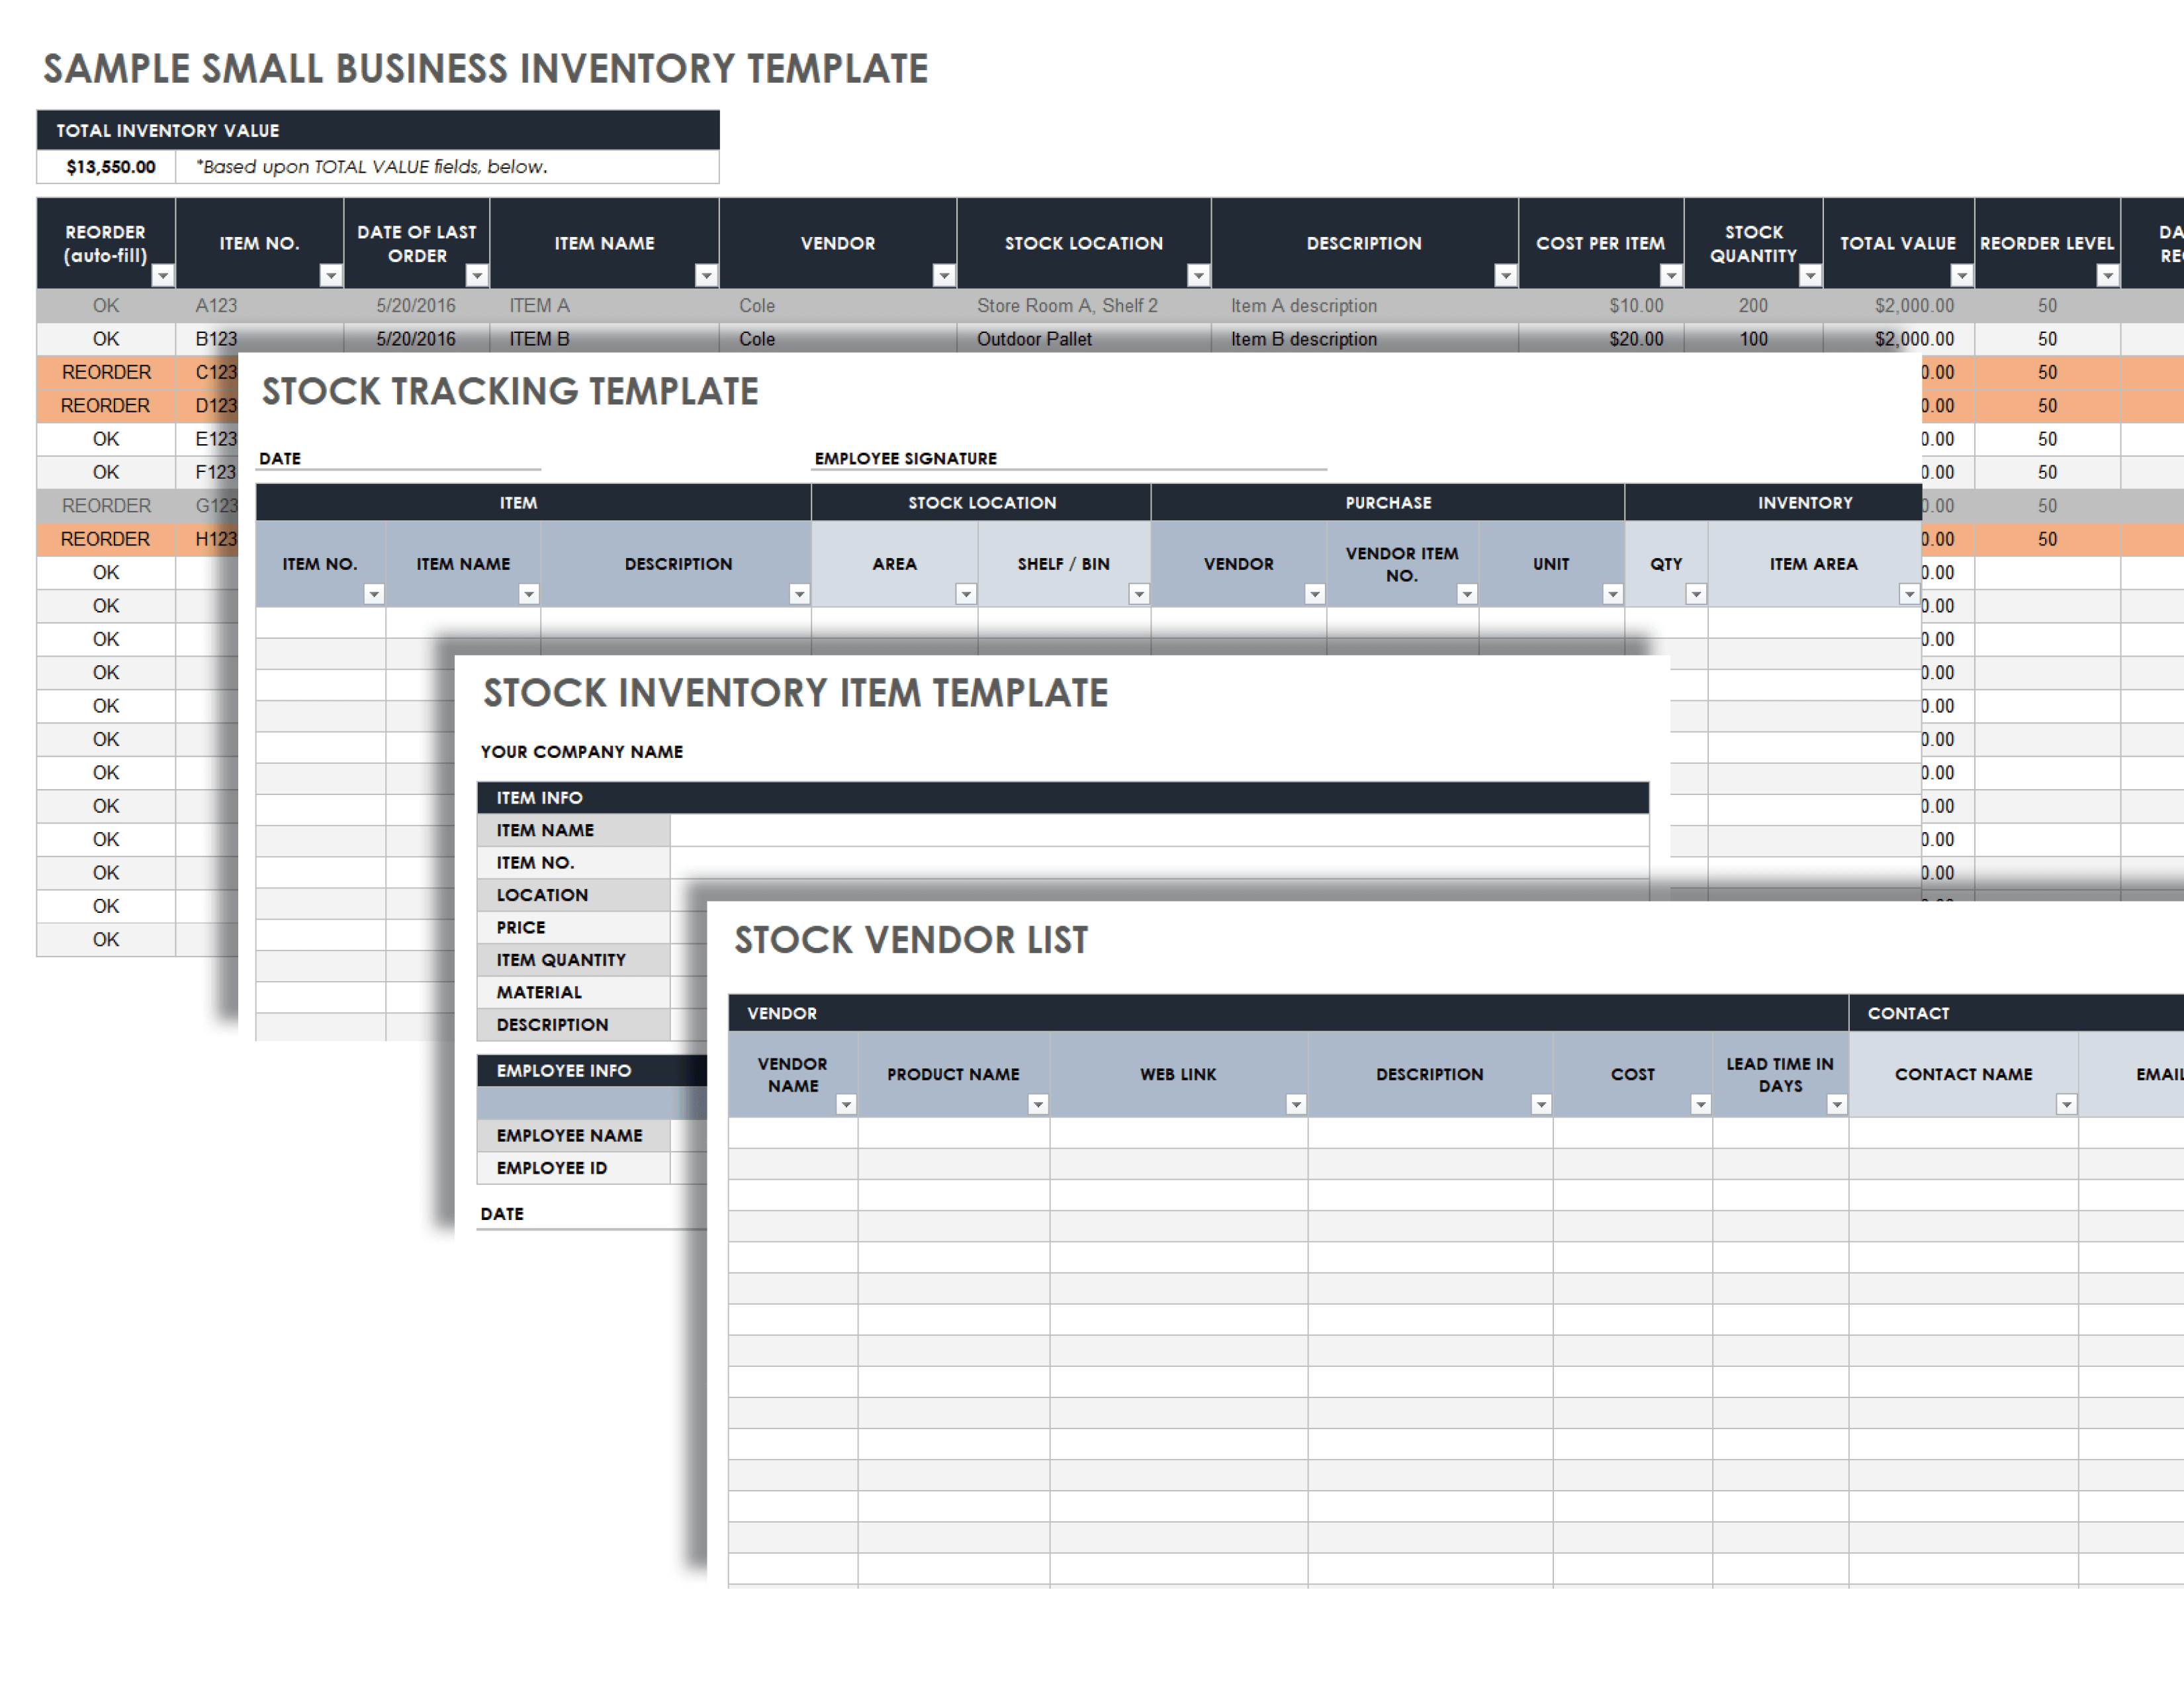 Sample Small Business Inventory Template